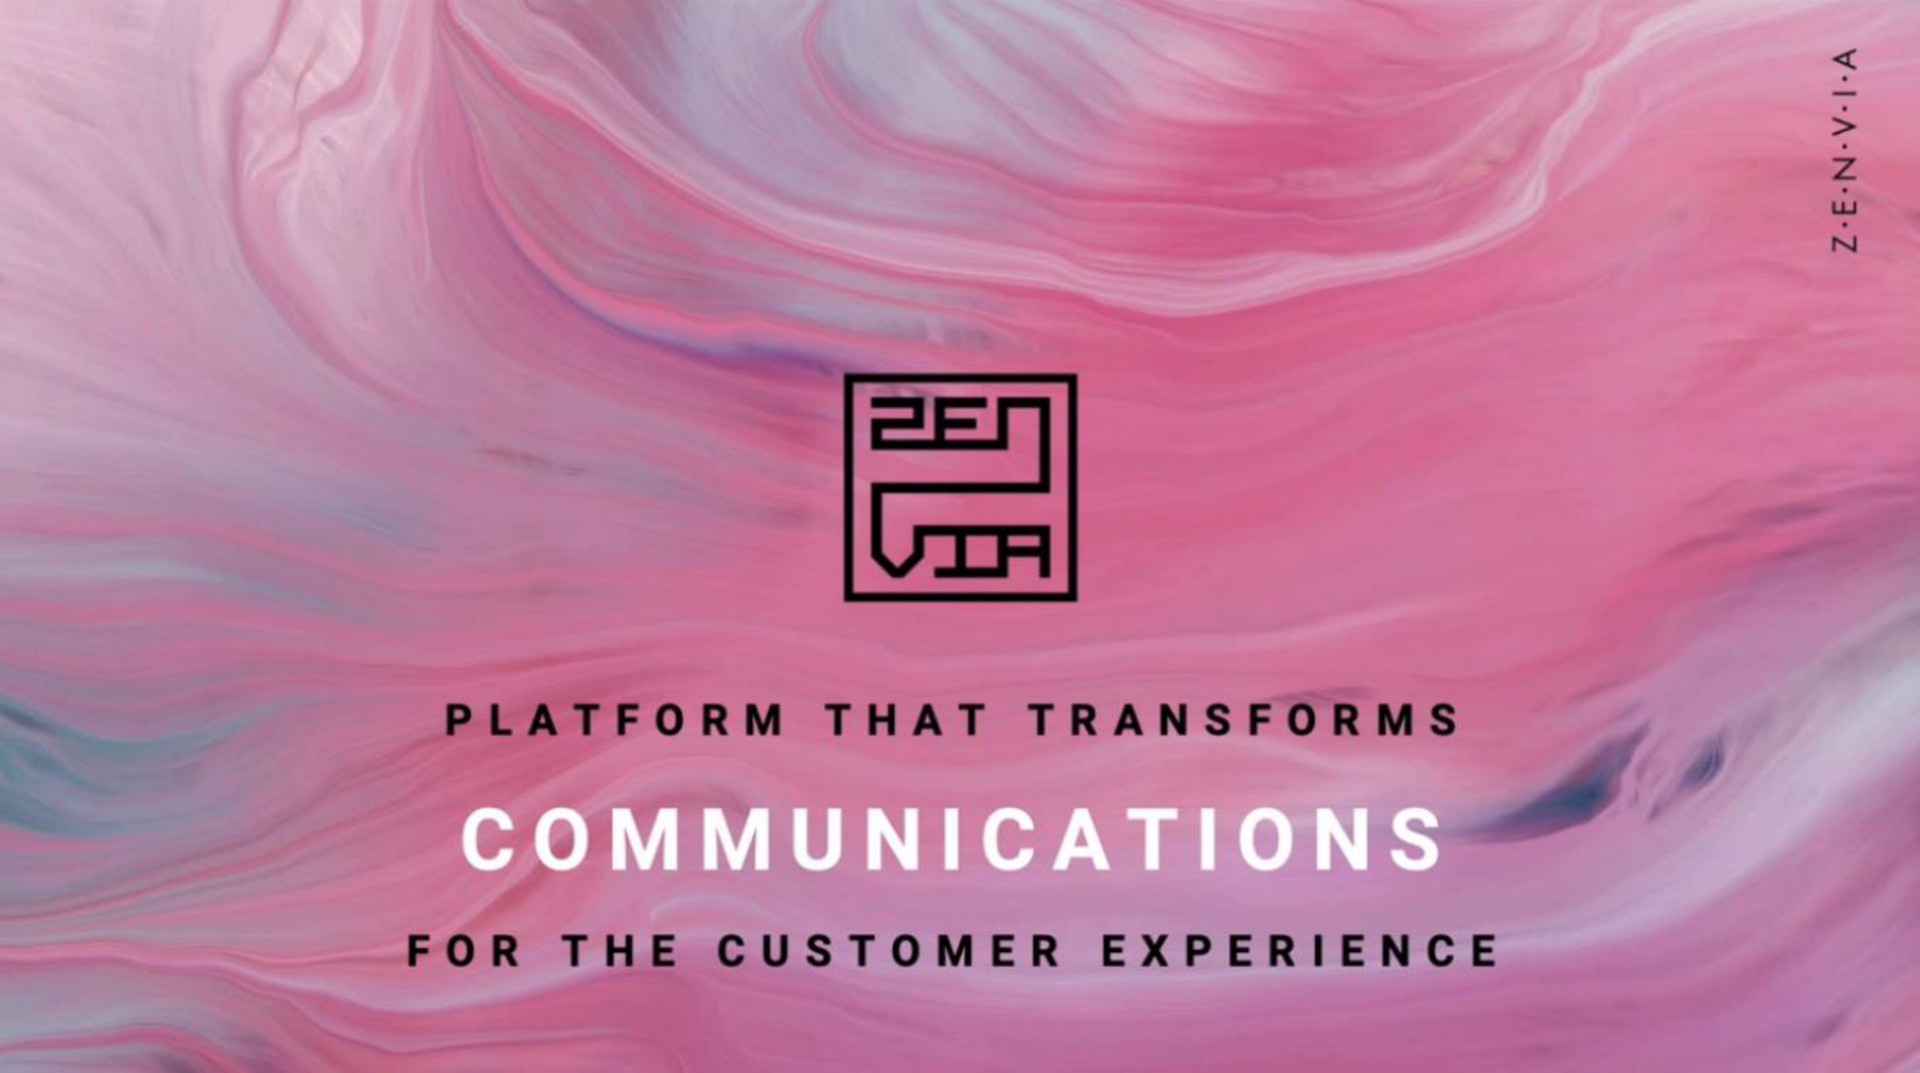 platform that transforms for the customer experience | Zenvia